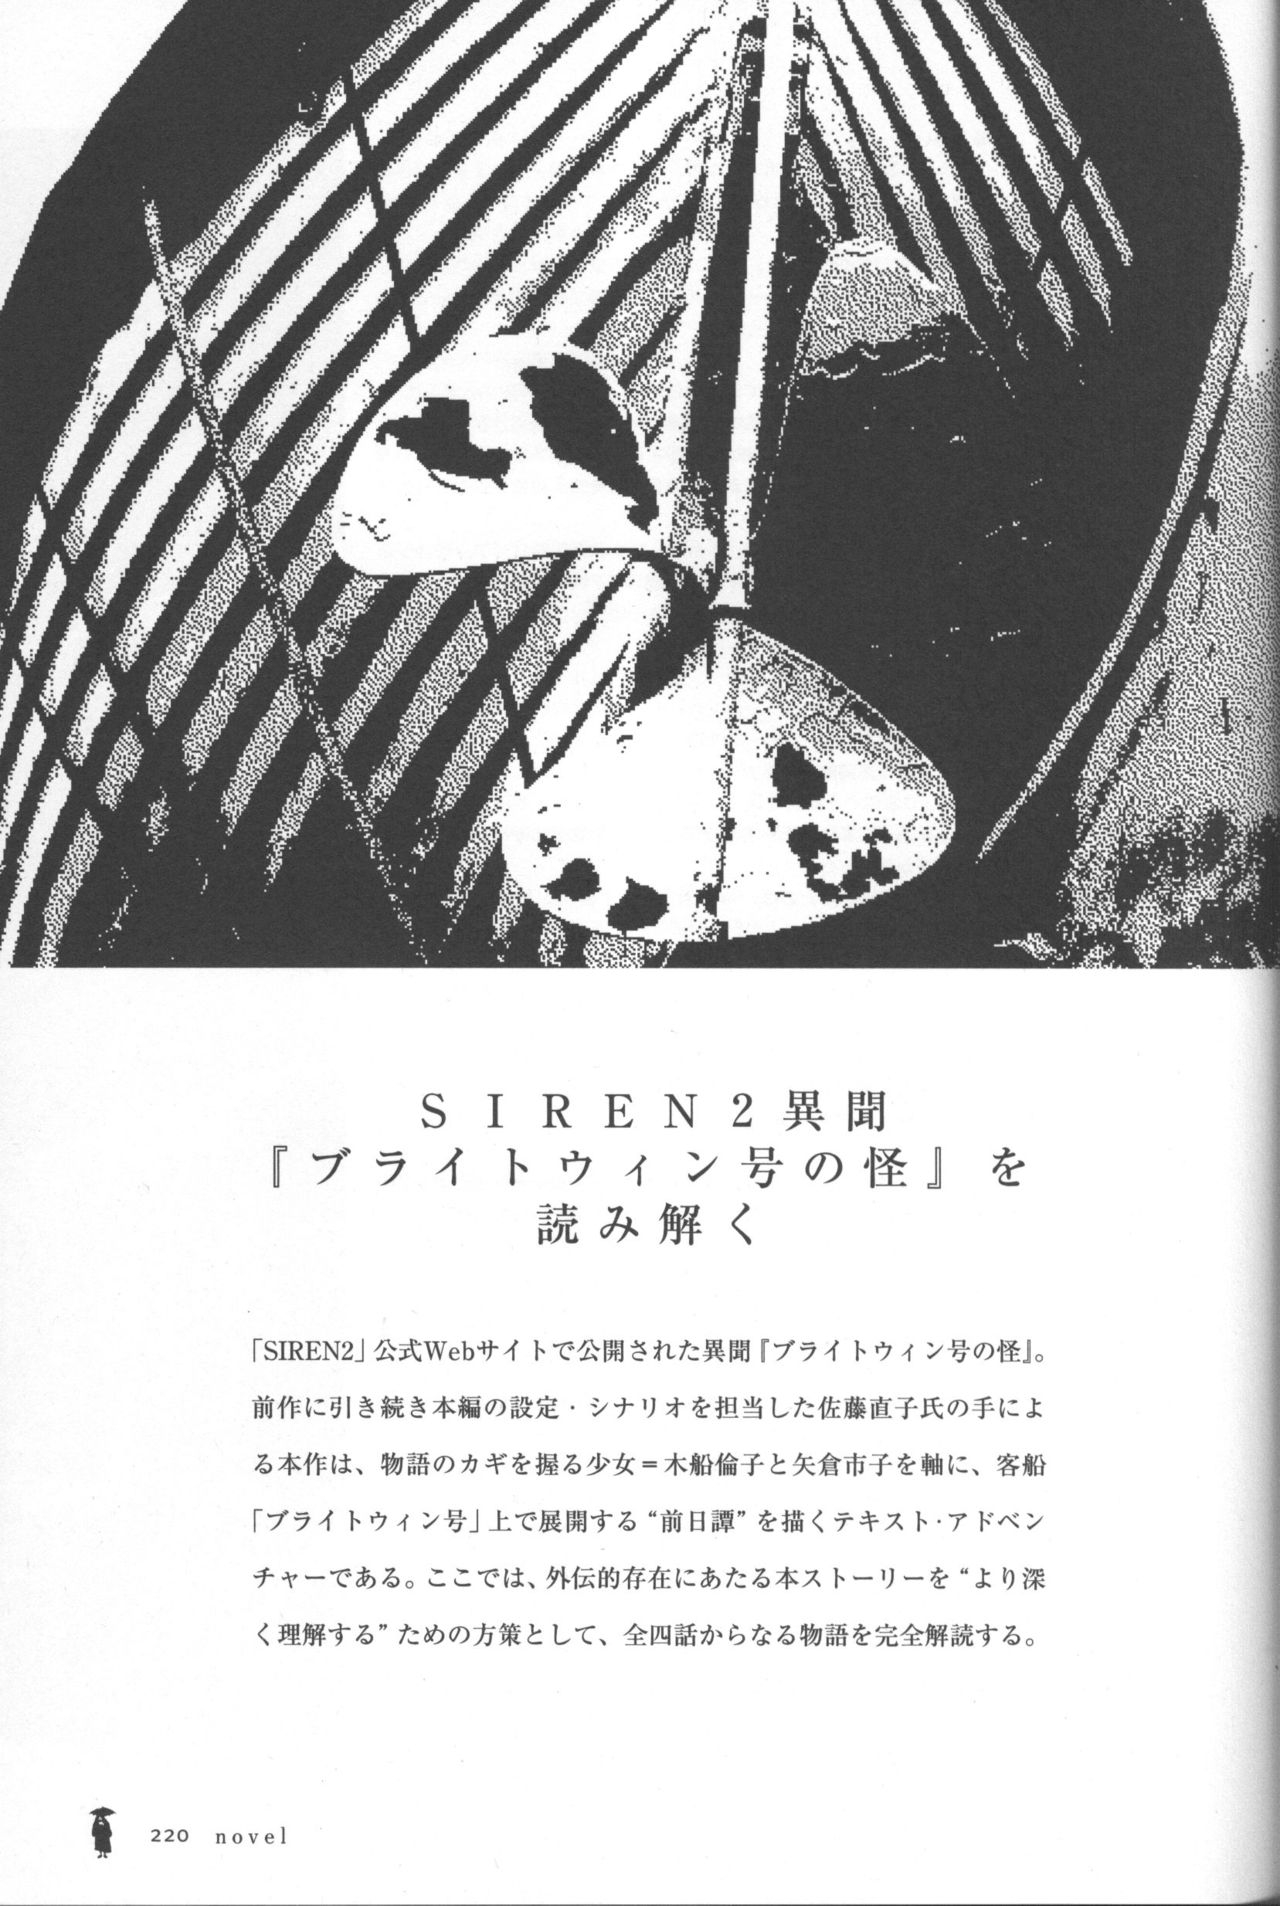 Siren 2 Maniacs Official Complete Analysis Book 223